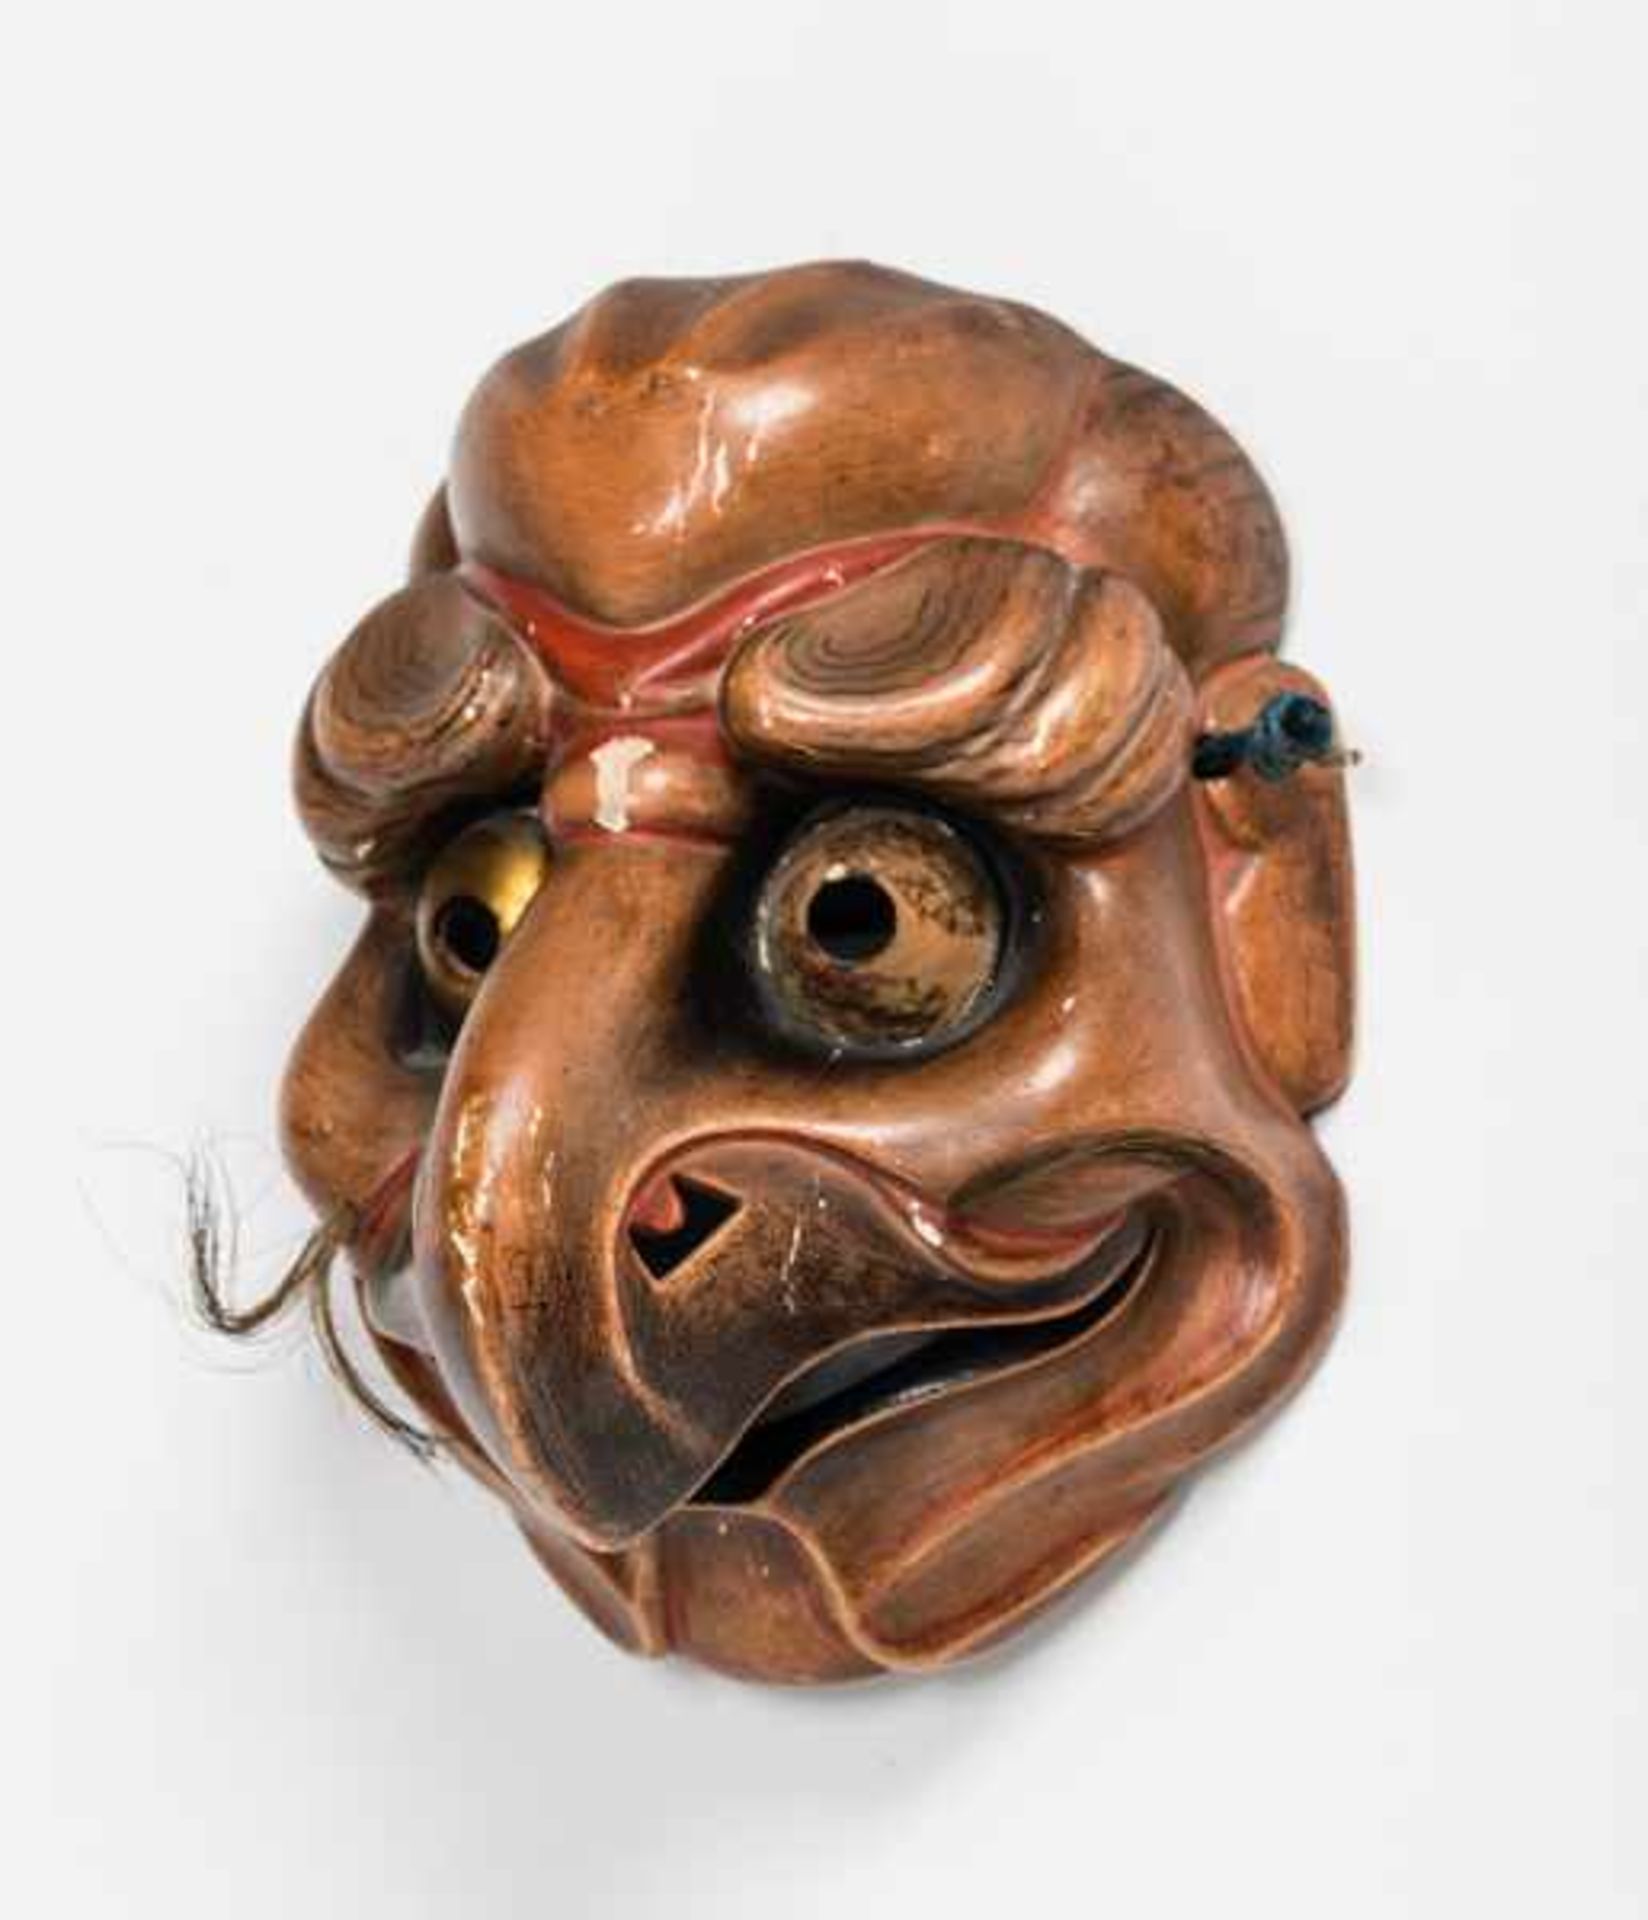 A KYOGEN MASK OF TOBI (BLACK KITE) Wood, gesso, pigments and animal hair. Japan, Edo period 17th – - Image 2 of 4